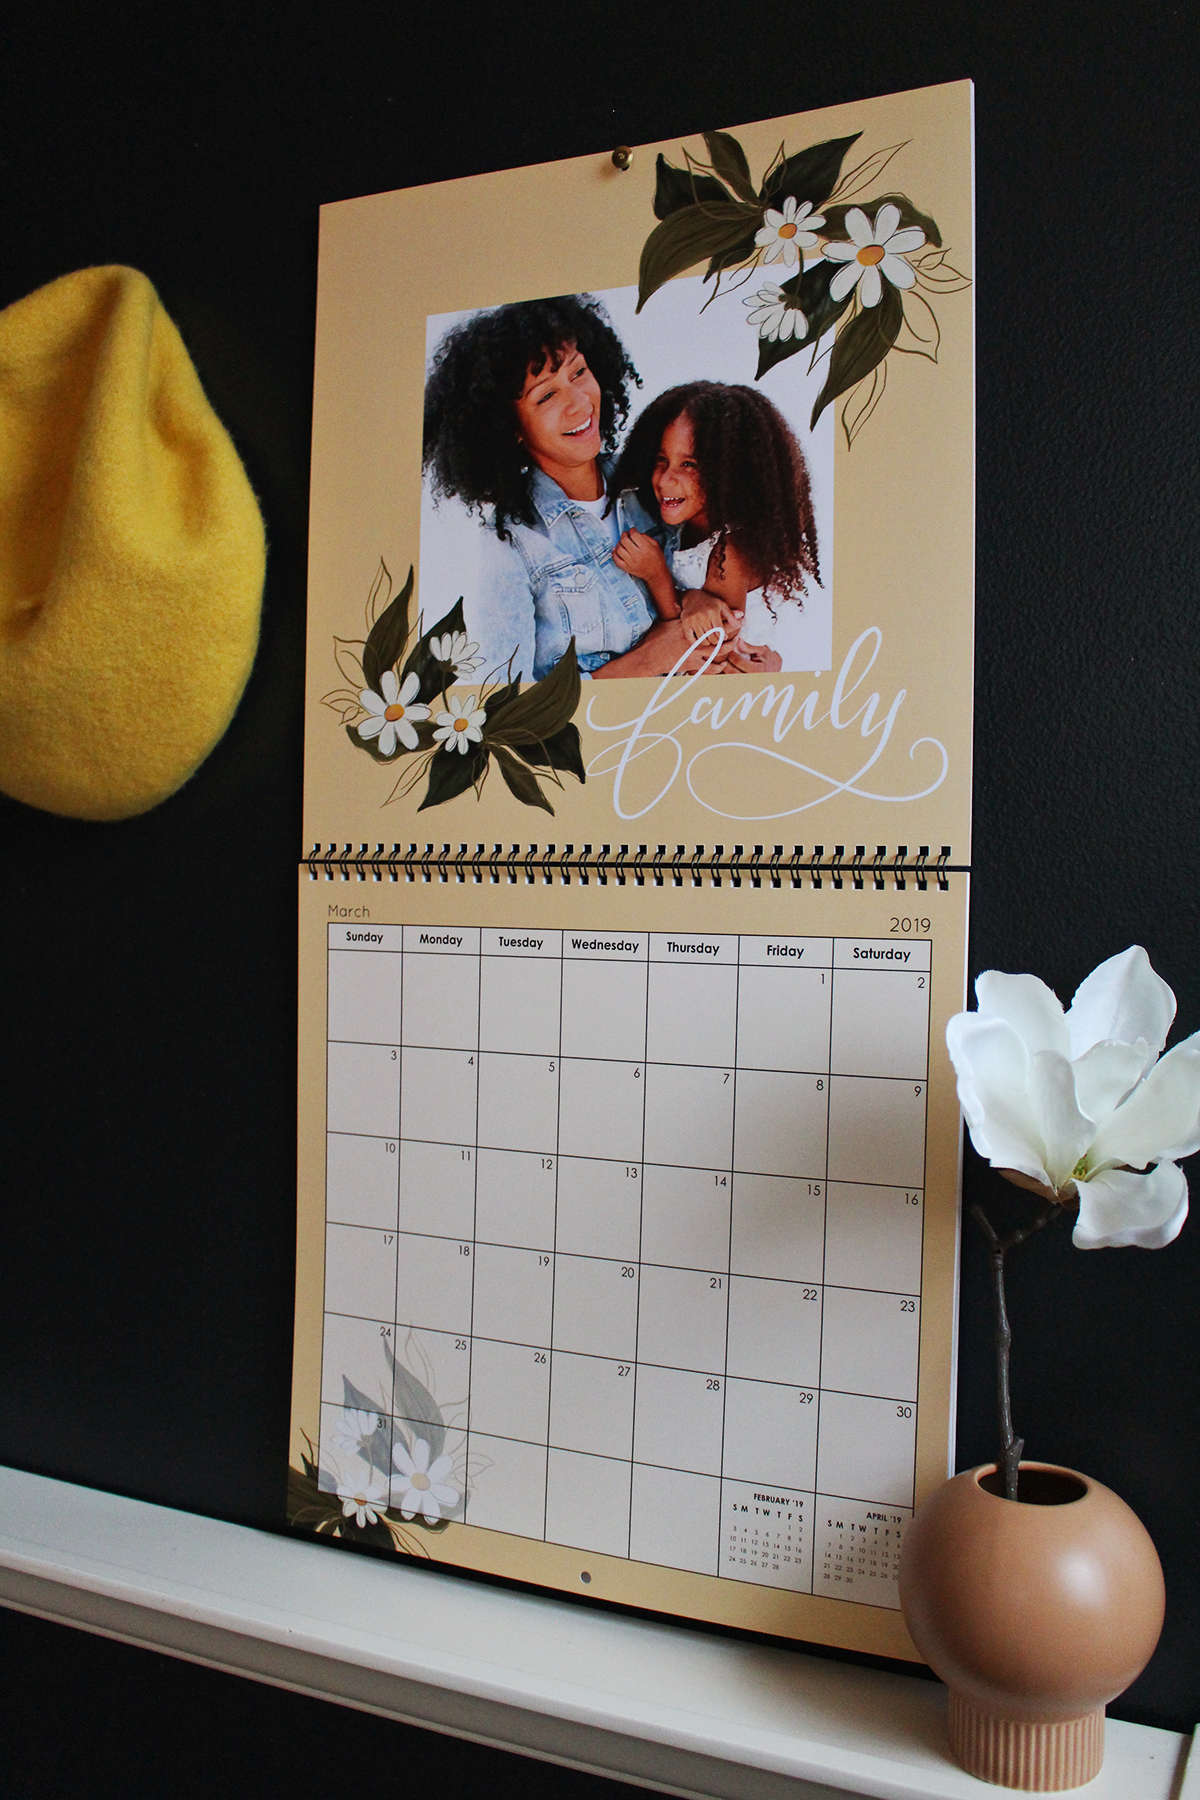 Customize your Lily & Val for Mixbook Photo Wall Calendar - Collect Every Beautiful Moment